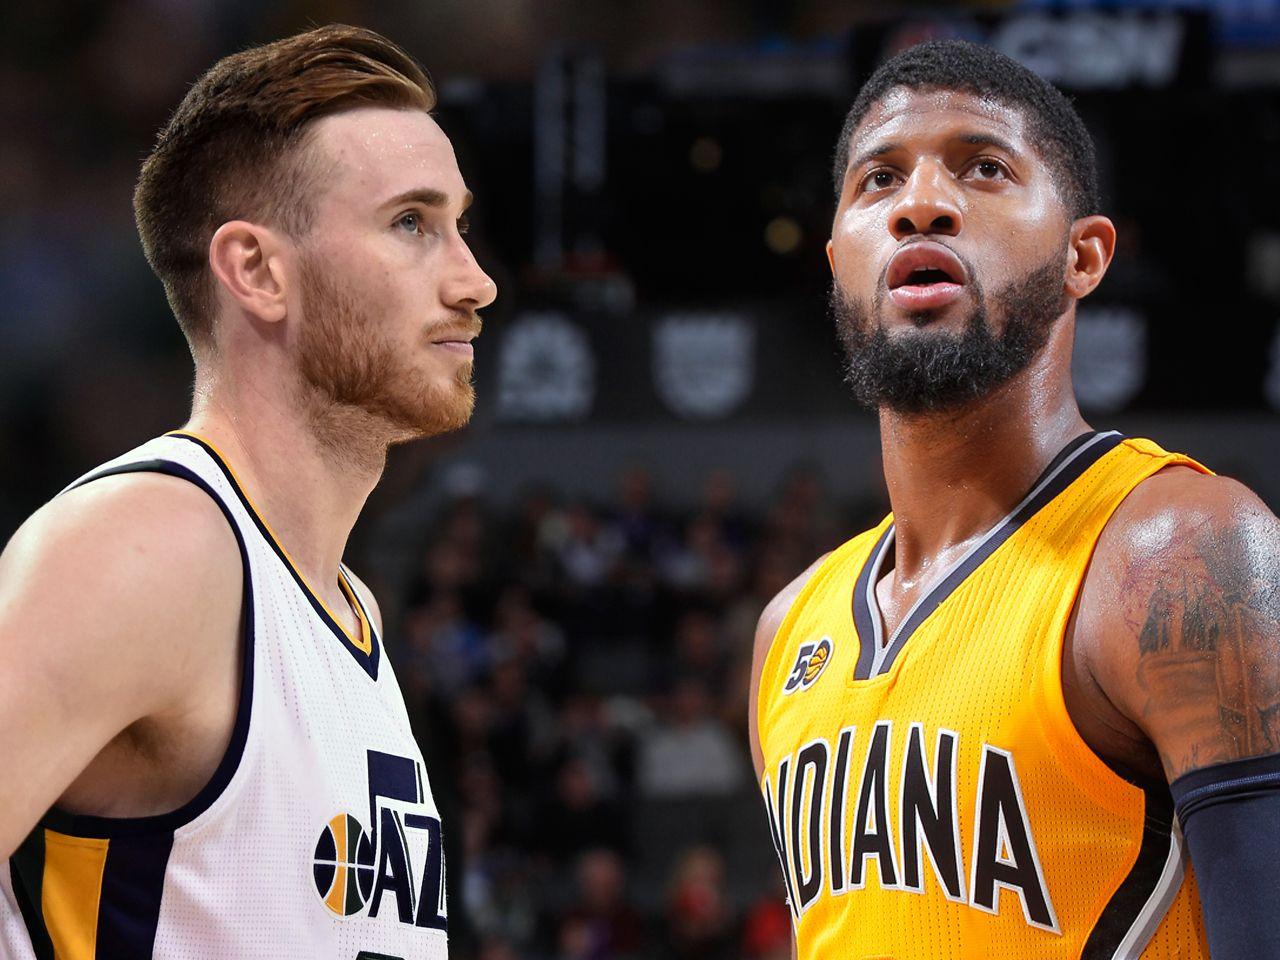 Report: Celtics Working To Acquire Gordon Hayward and Paul George